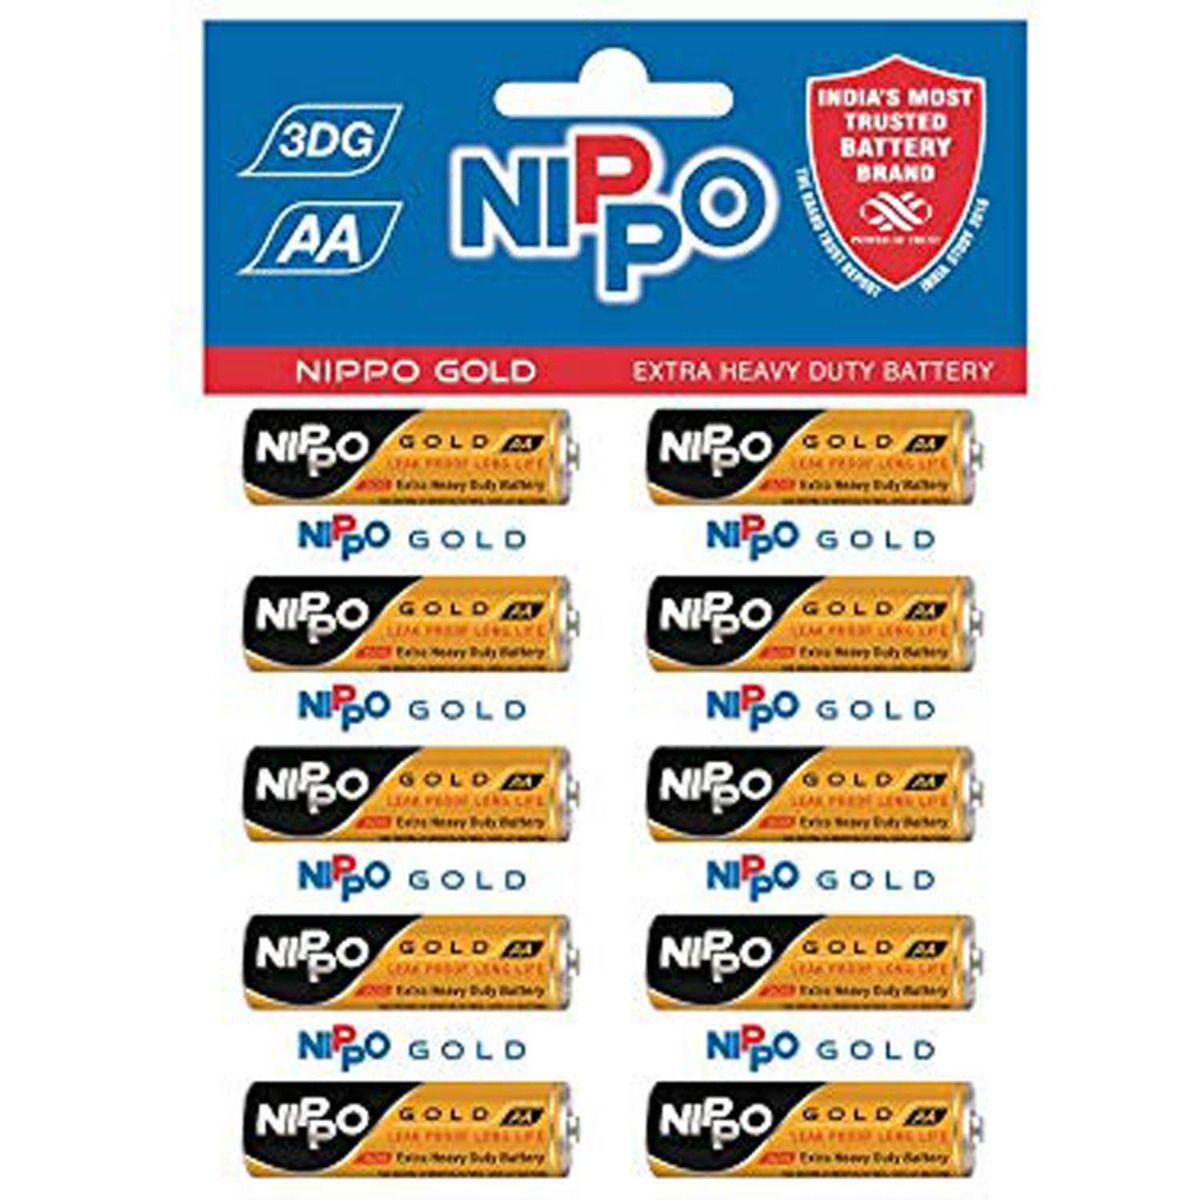 Nippo Gold AA Battery, 1 Count, Pack of 10 S